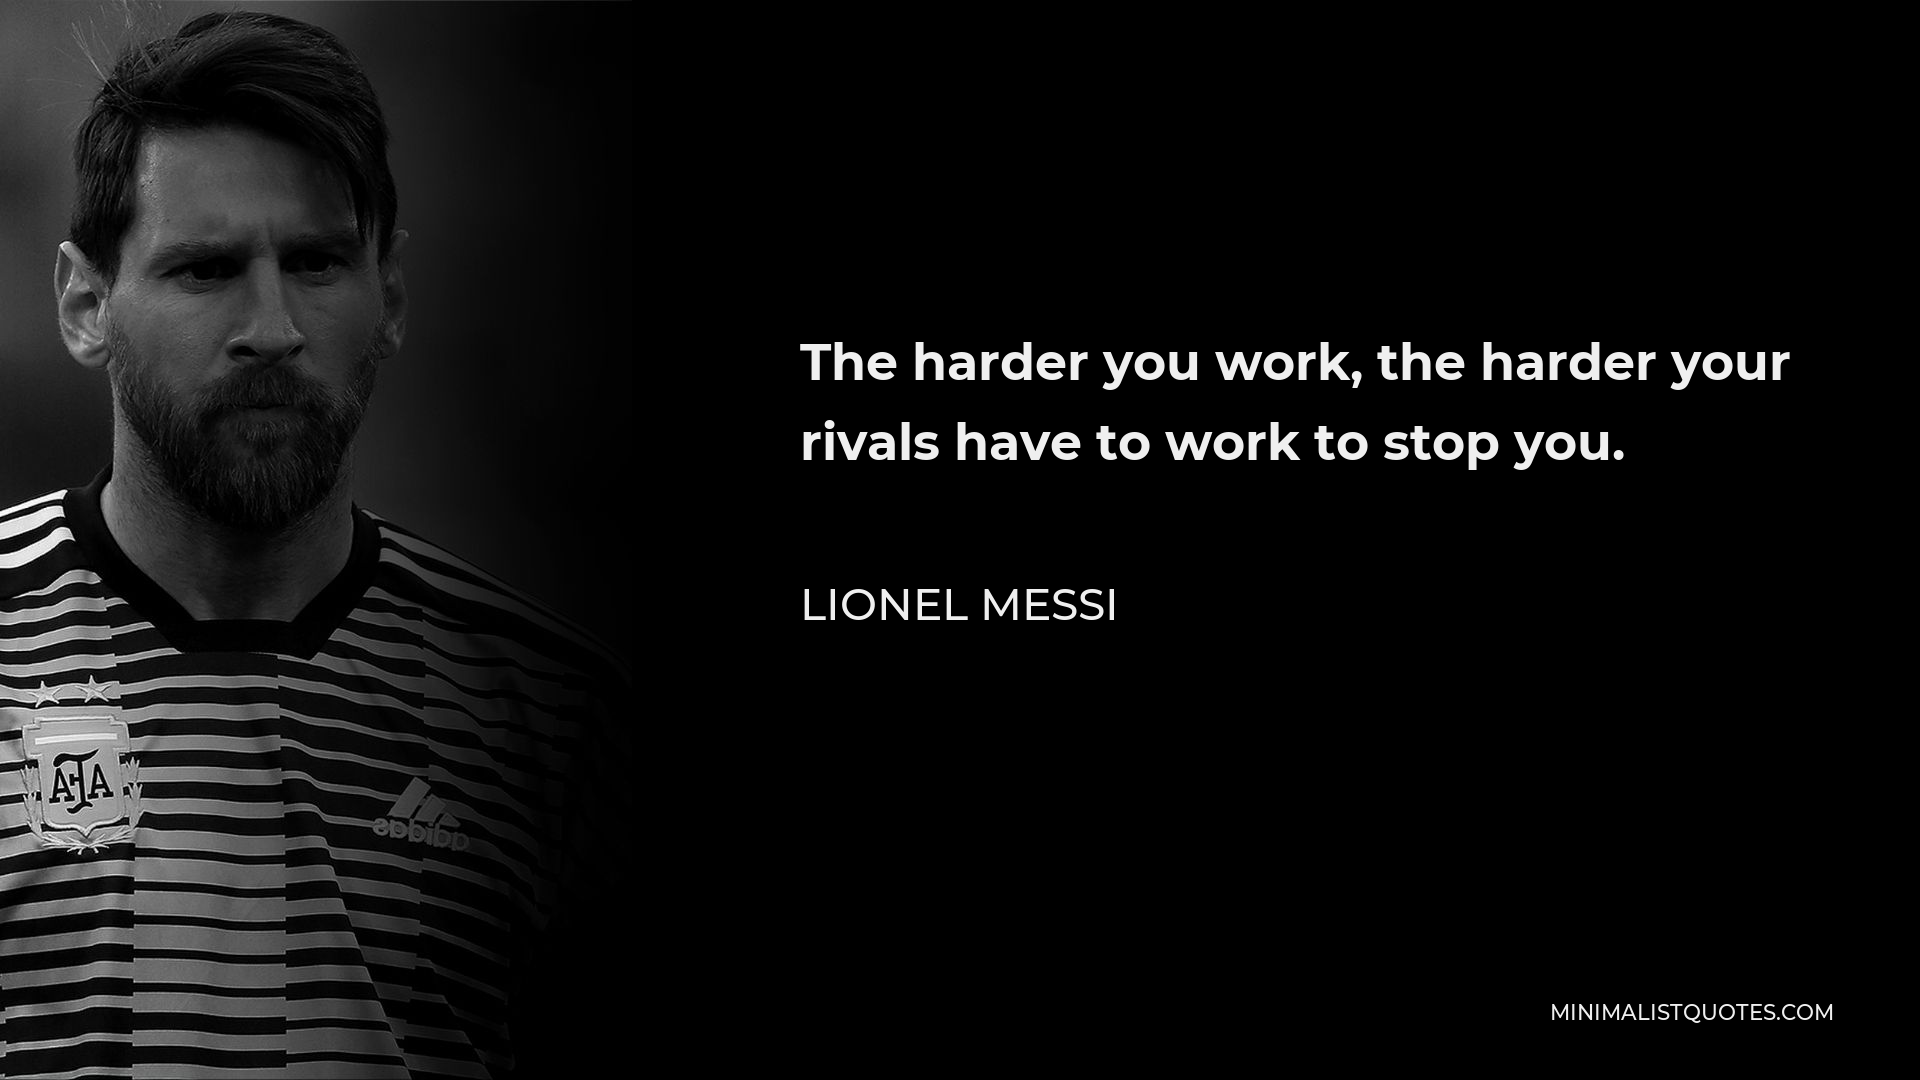 Lionel Messi Quote - The harder you work, the harder your rivals have to work to stop you.